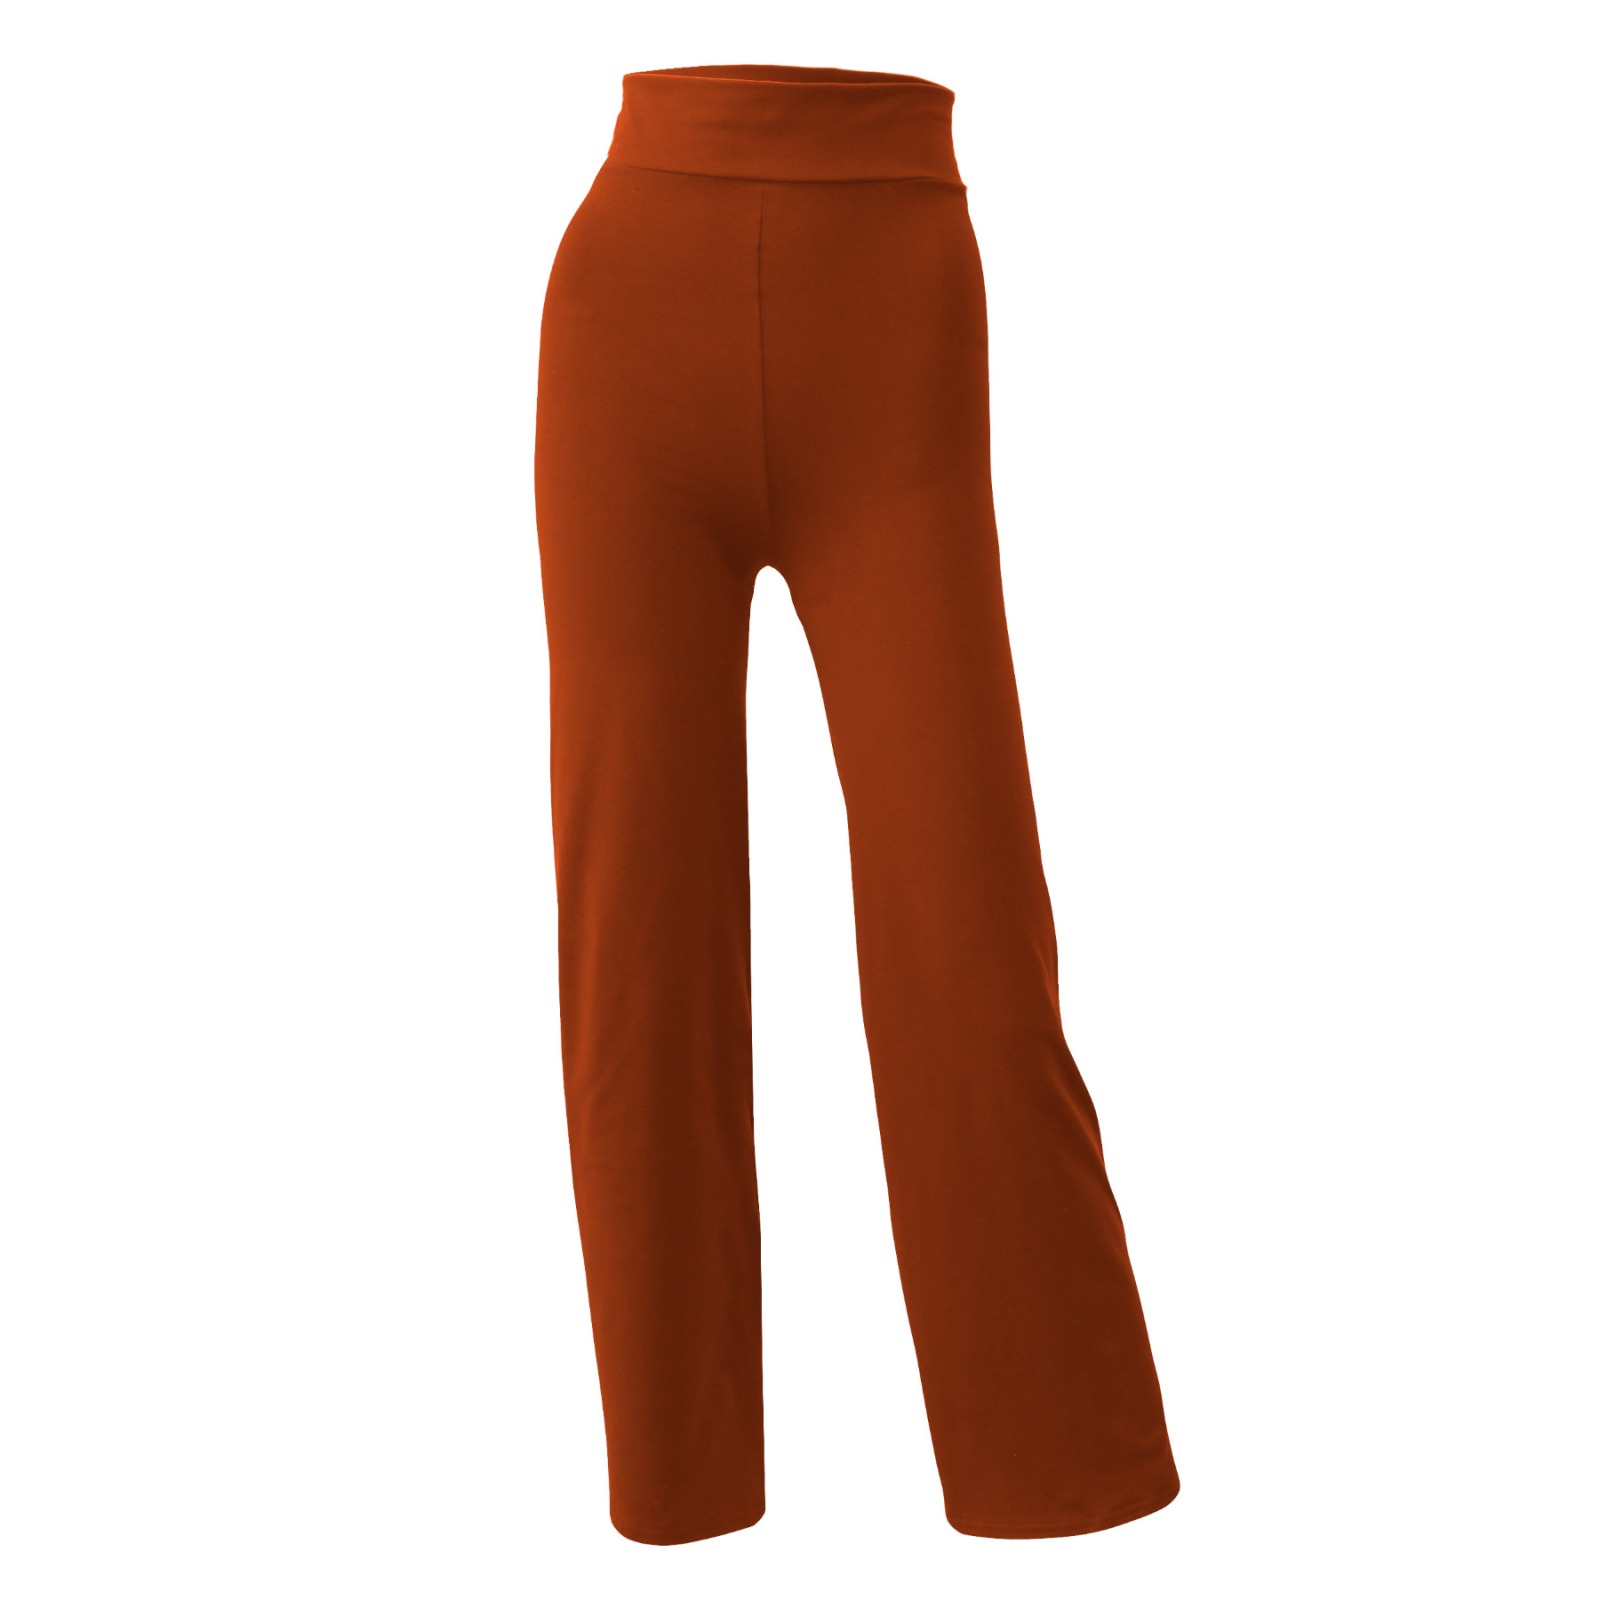 Yogahose Relaxed Fit rost orange